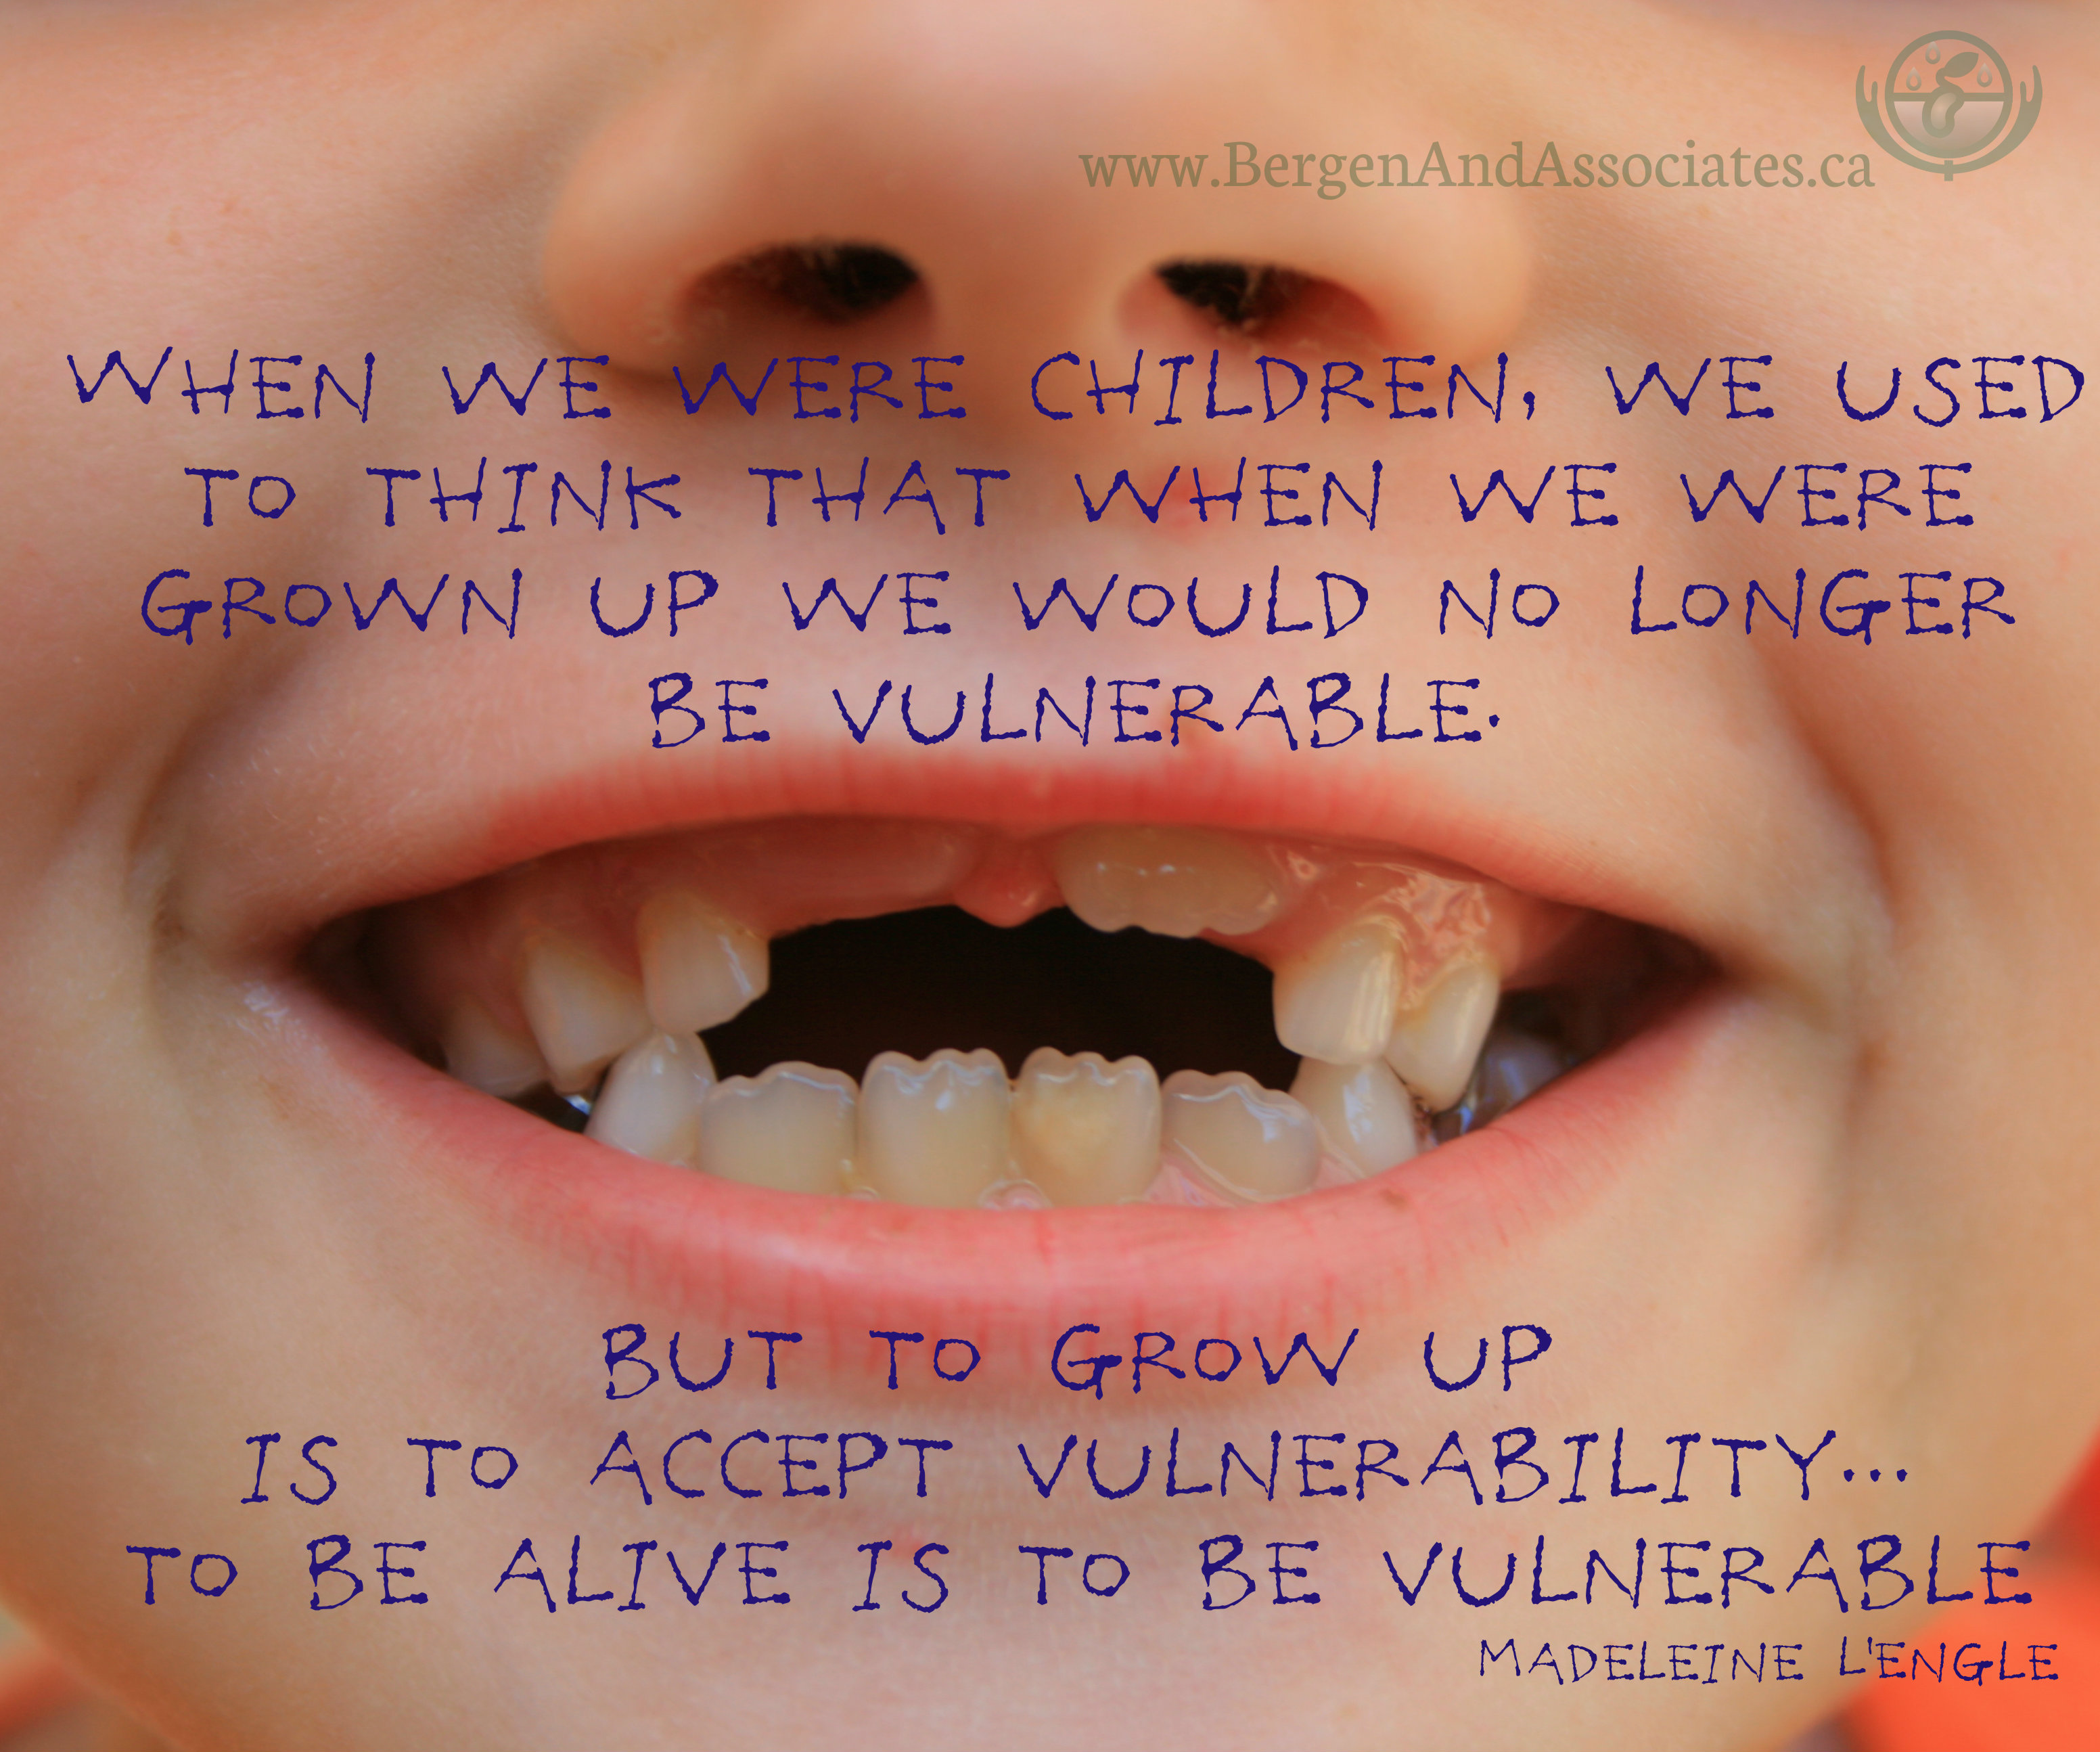 When we were children, we used to think when we were grown up we would not longer be vulnerable. But to grow up is to accept vulnerability. To be alive is to be vulnerable. Poster of this quote by Madeleine L